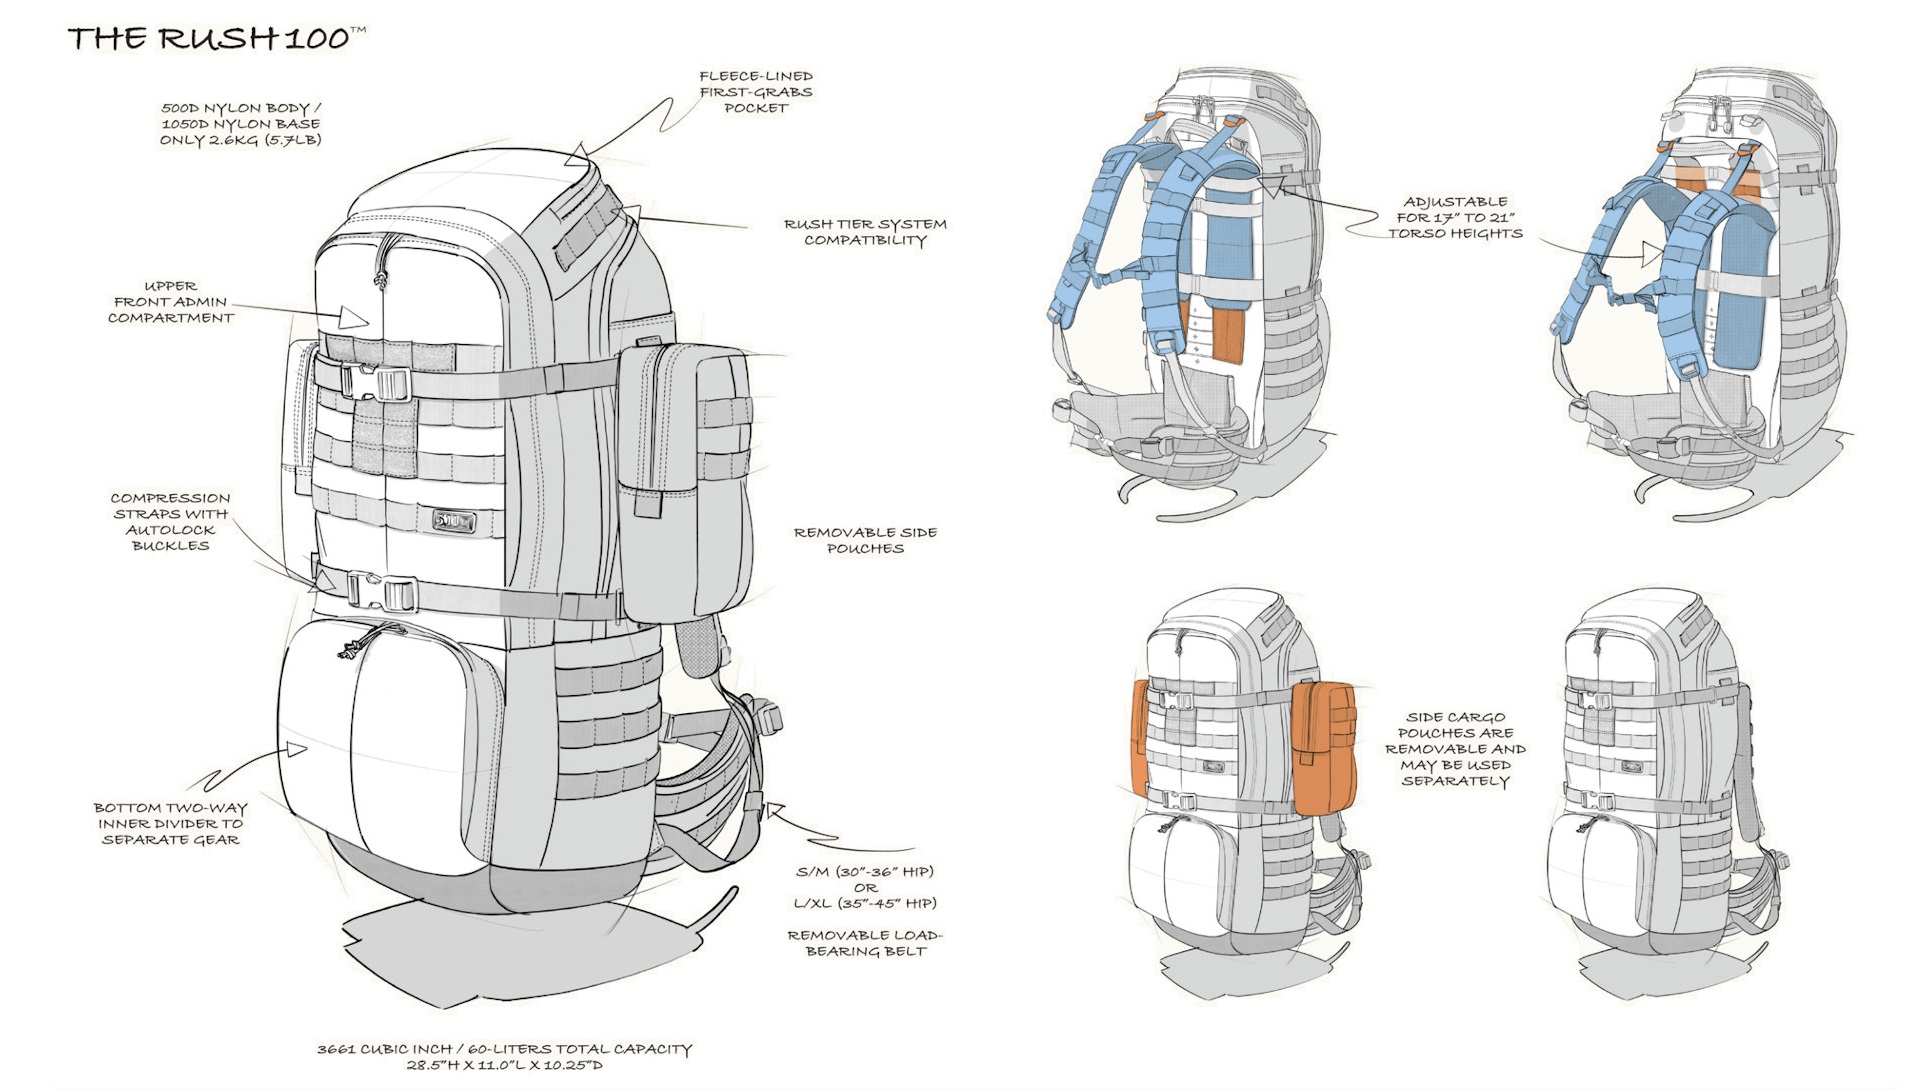 Construction diagram of the legendary 5.11 Tactical Rush 100 Backpack